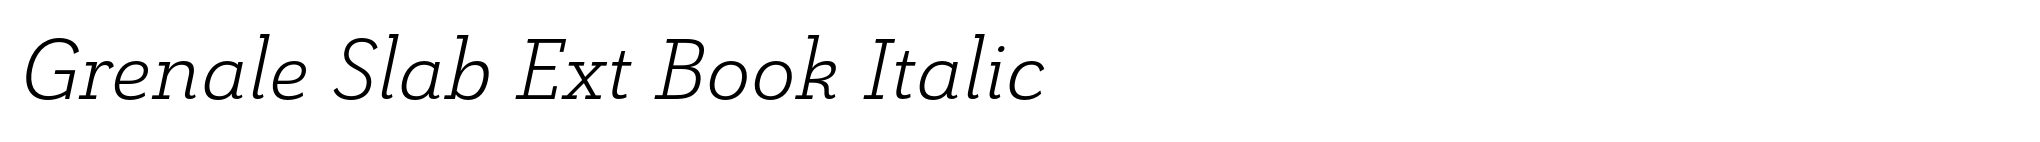 Grenale Slab Ext Book Italic image